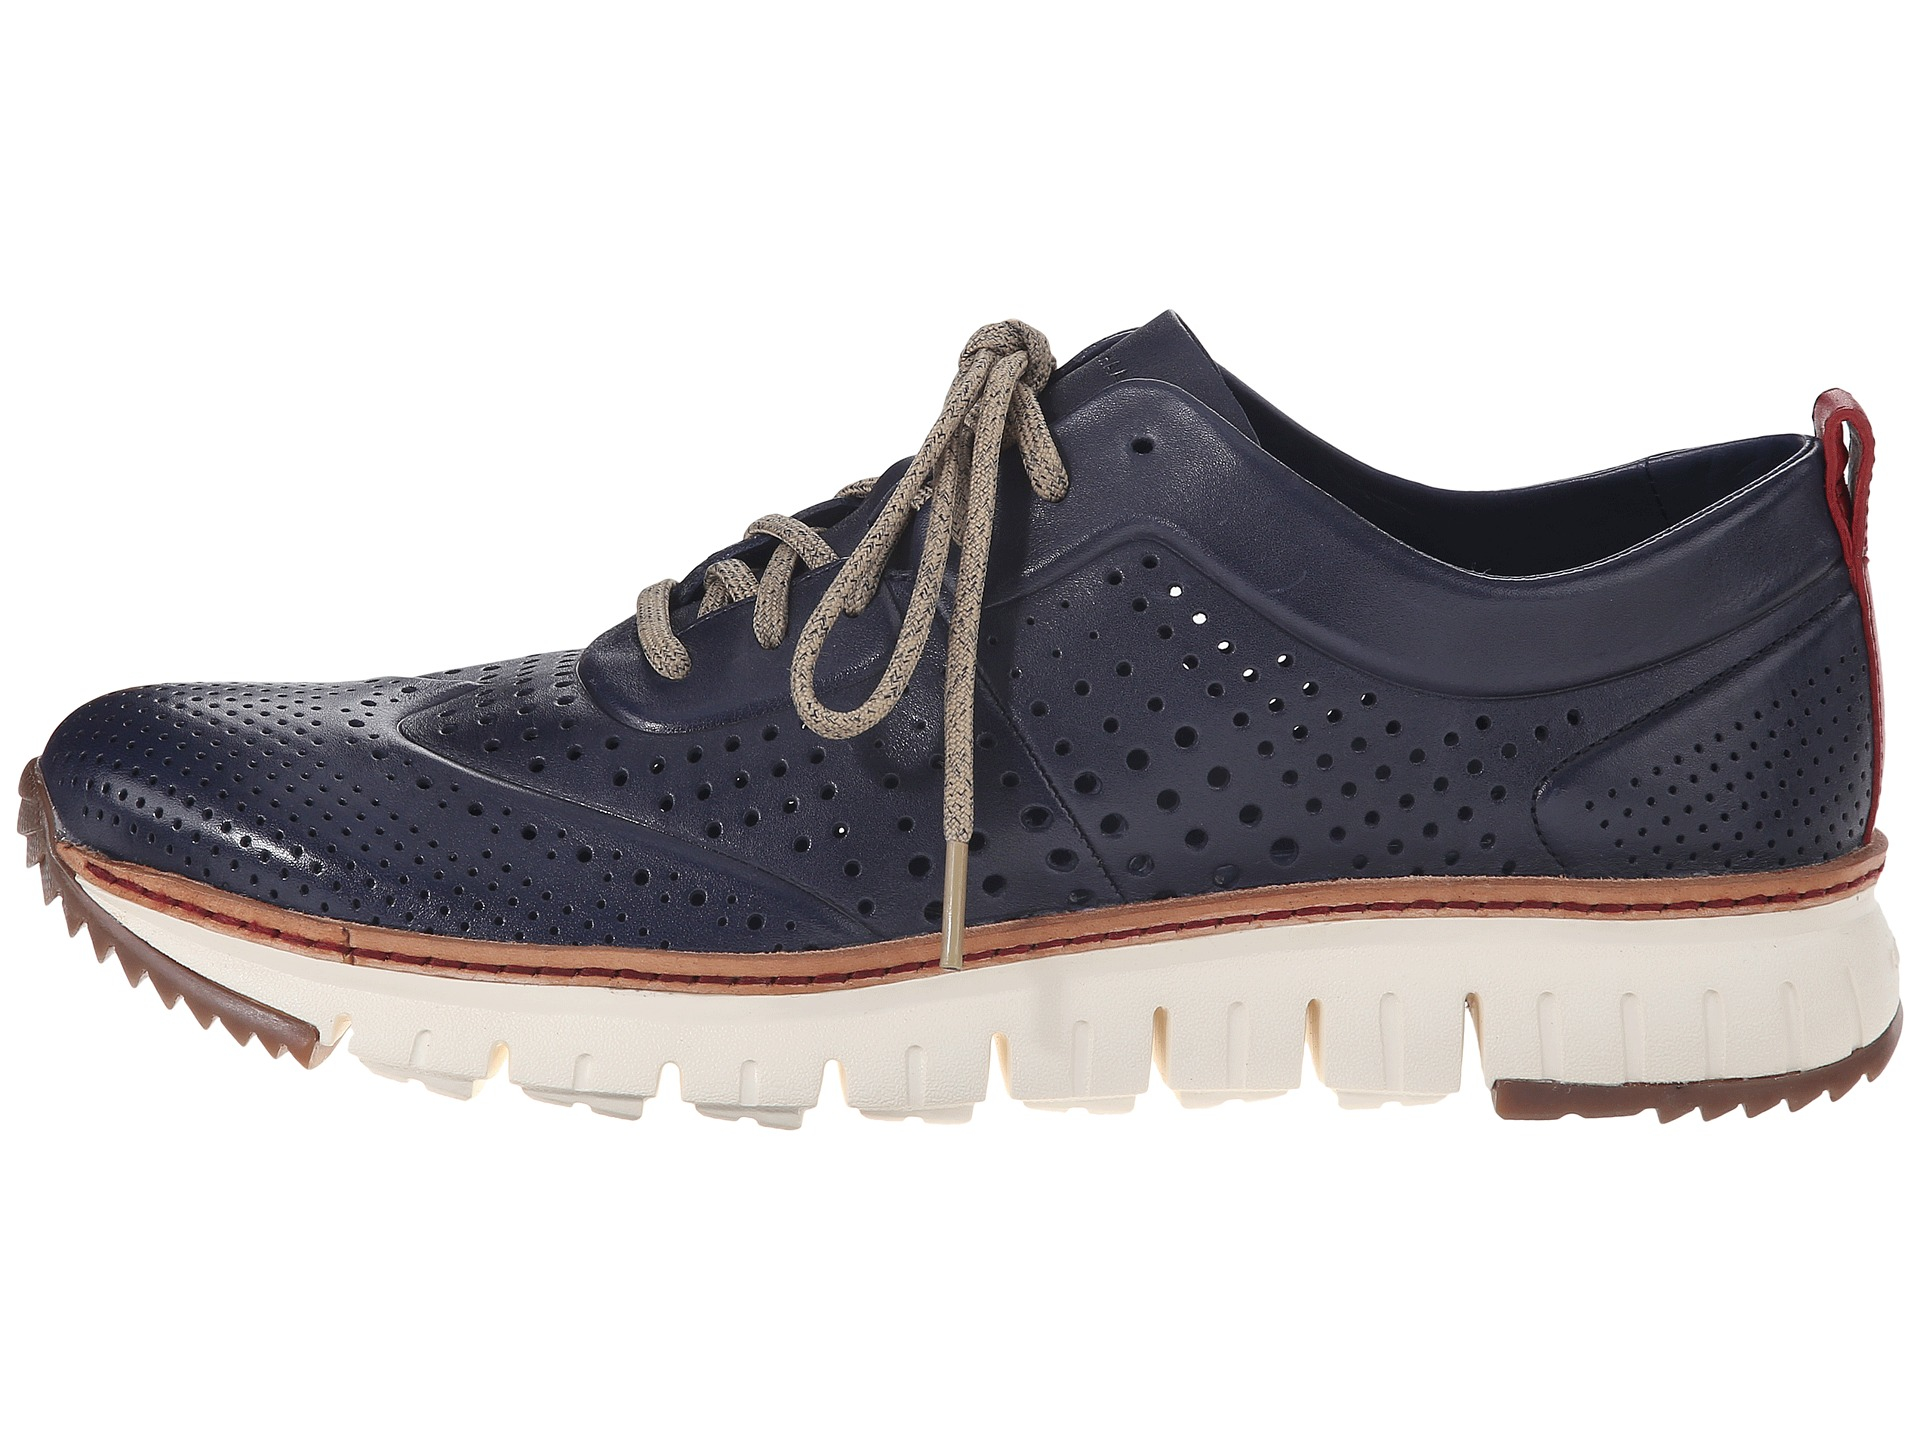 Lyst - Cole Haan Zerogrand Perforated Sneakers in Blue for Men